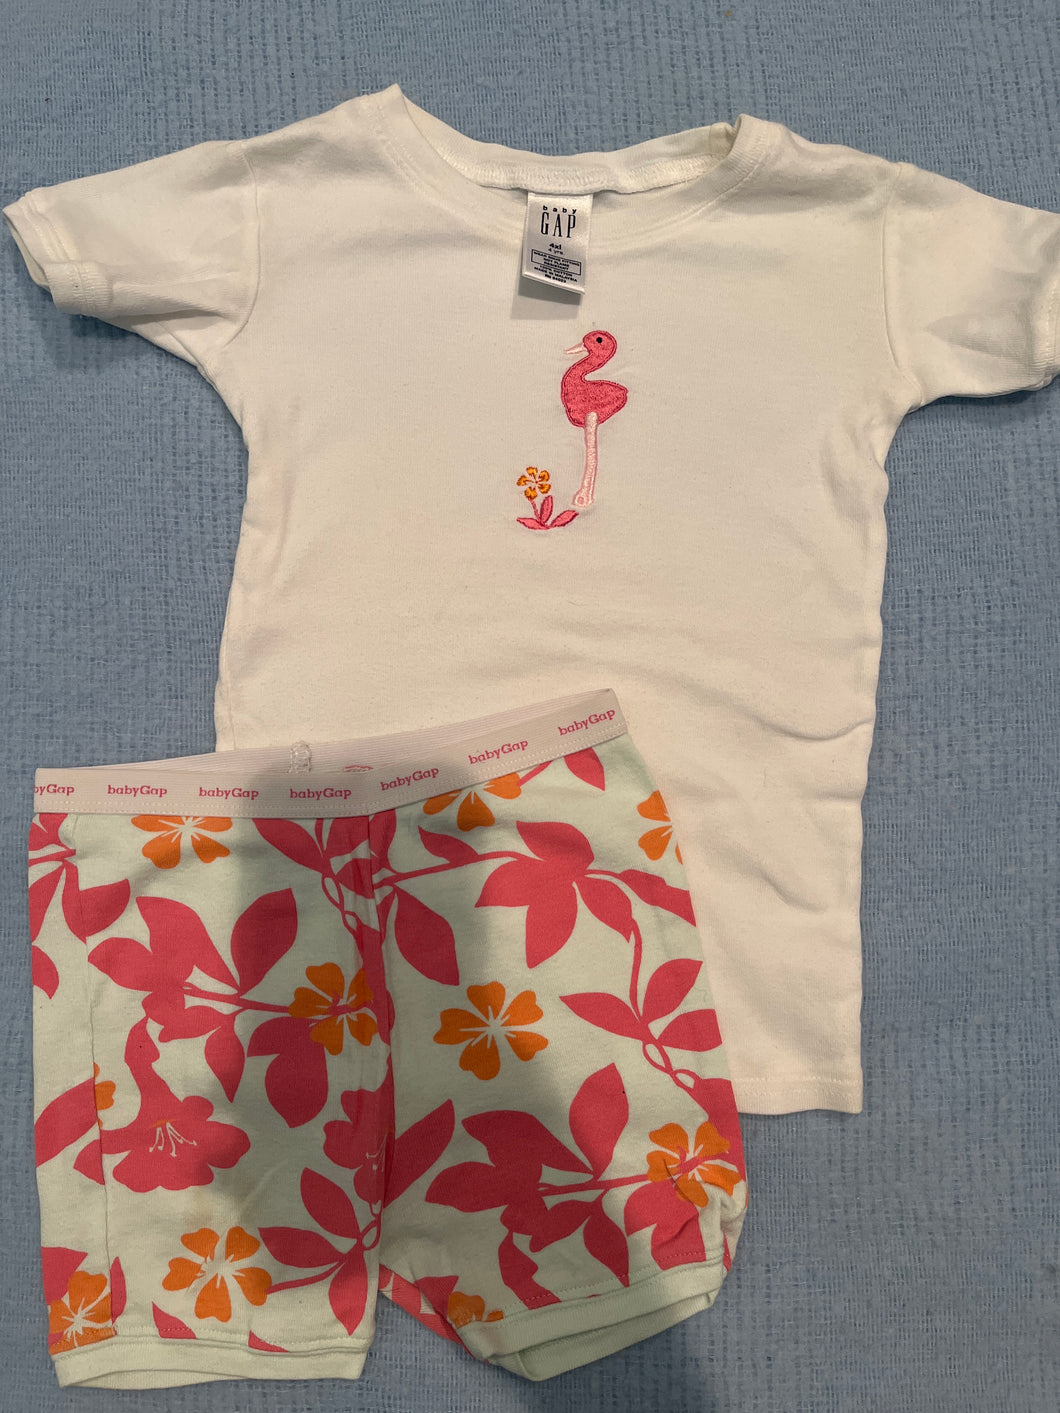 Baby gap pink flamingo pjs with light blue flower shorts  4